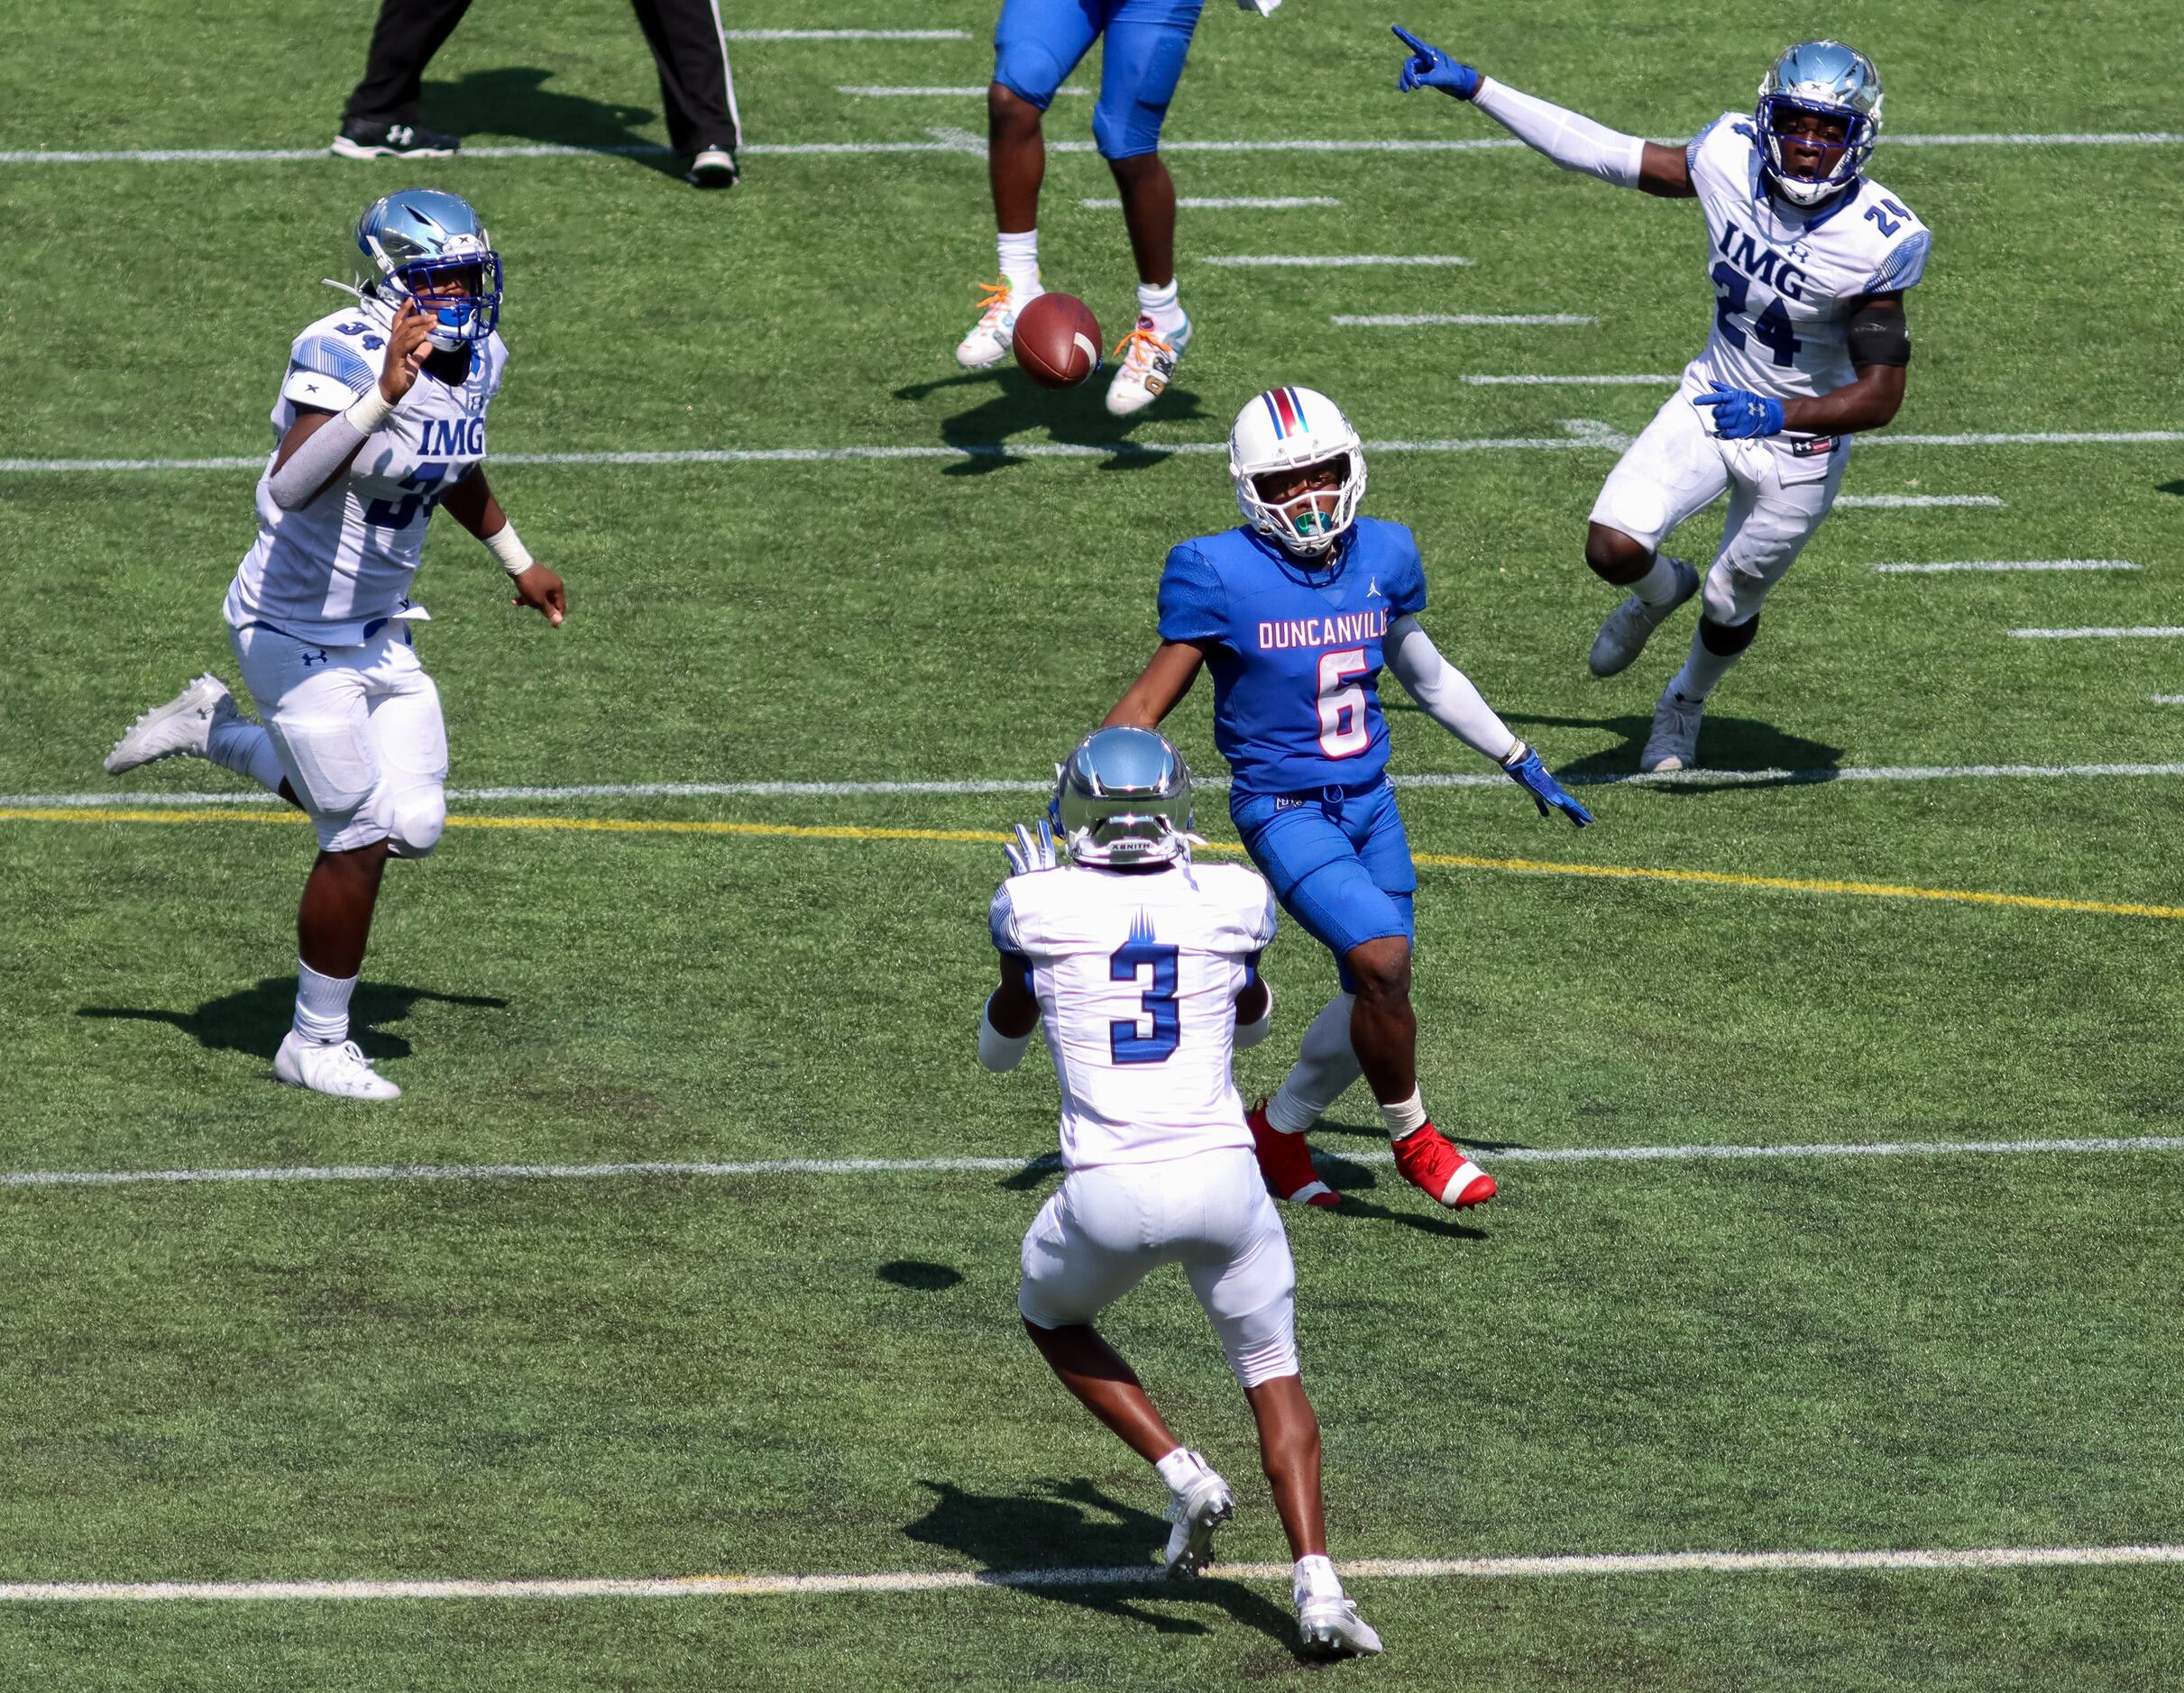 IMG Academy defensive back Omar Burroughs (3) intercepts a pass intended for Duncanville...